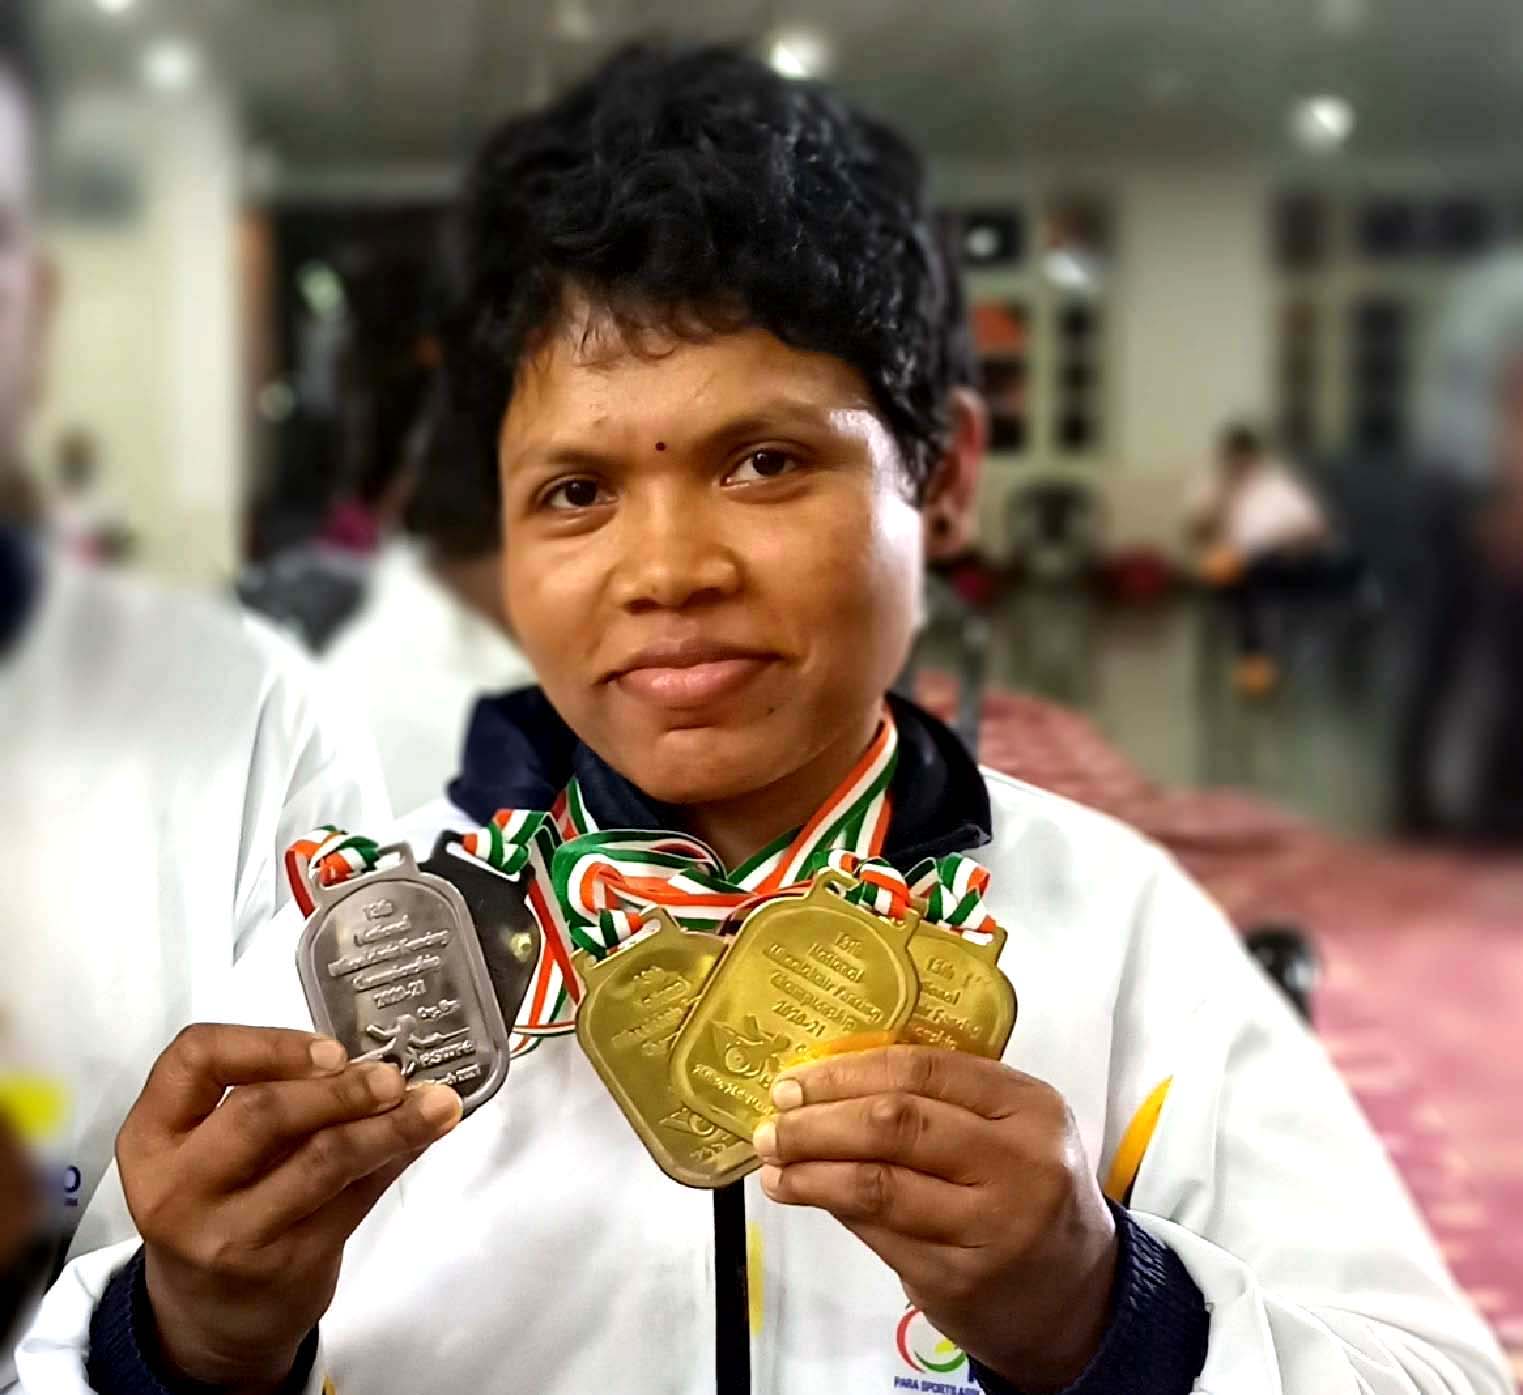 Odisha woman para-fencer Pujaswini Nayak with her medals at the 13th National Wheelchair Fencing Championship in Karnal, Haryana on 28 March, 2021.